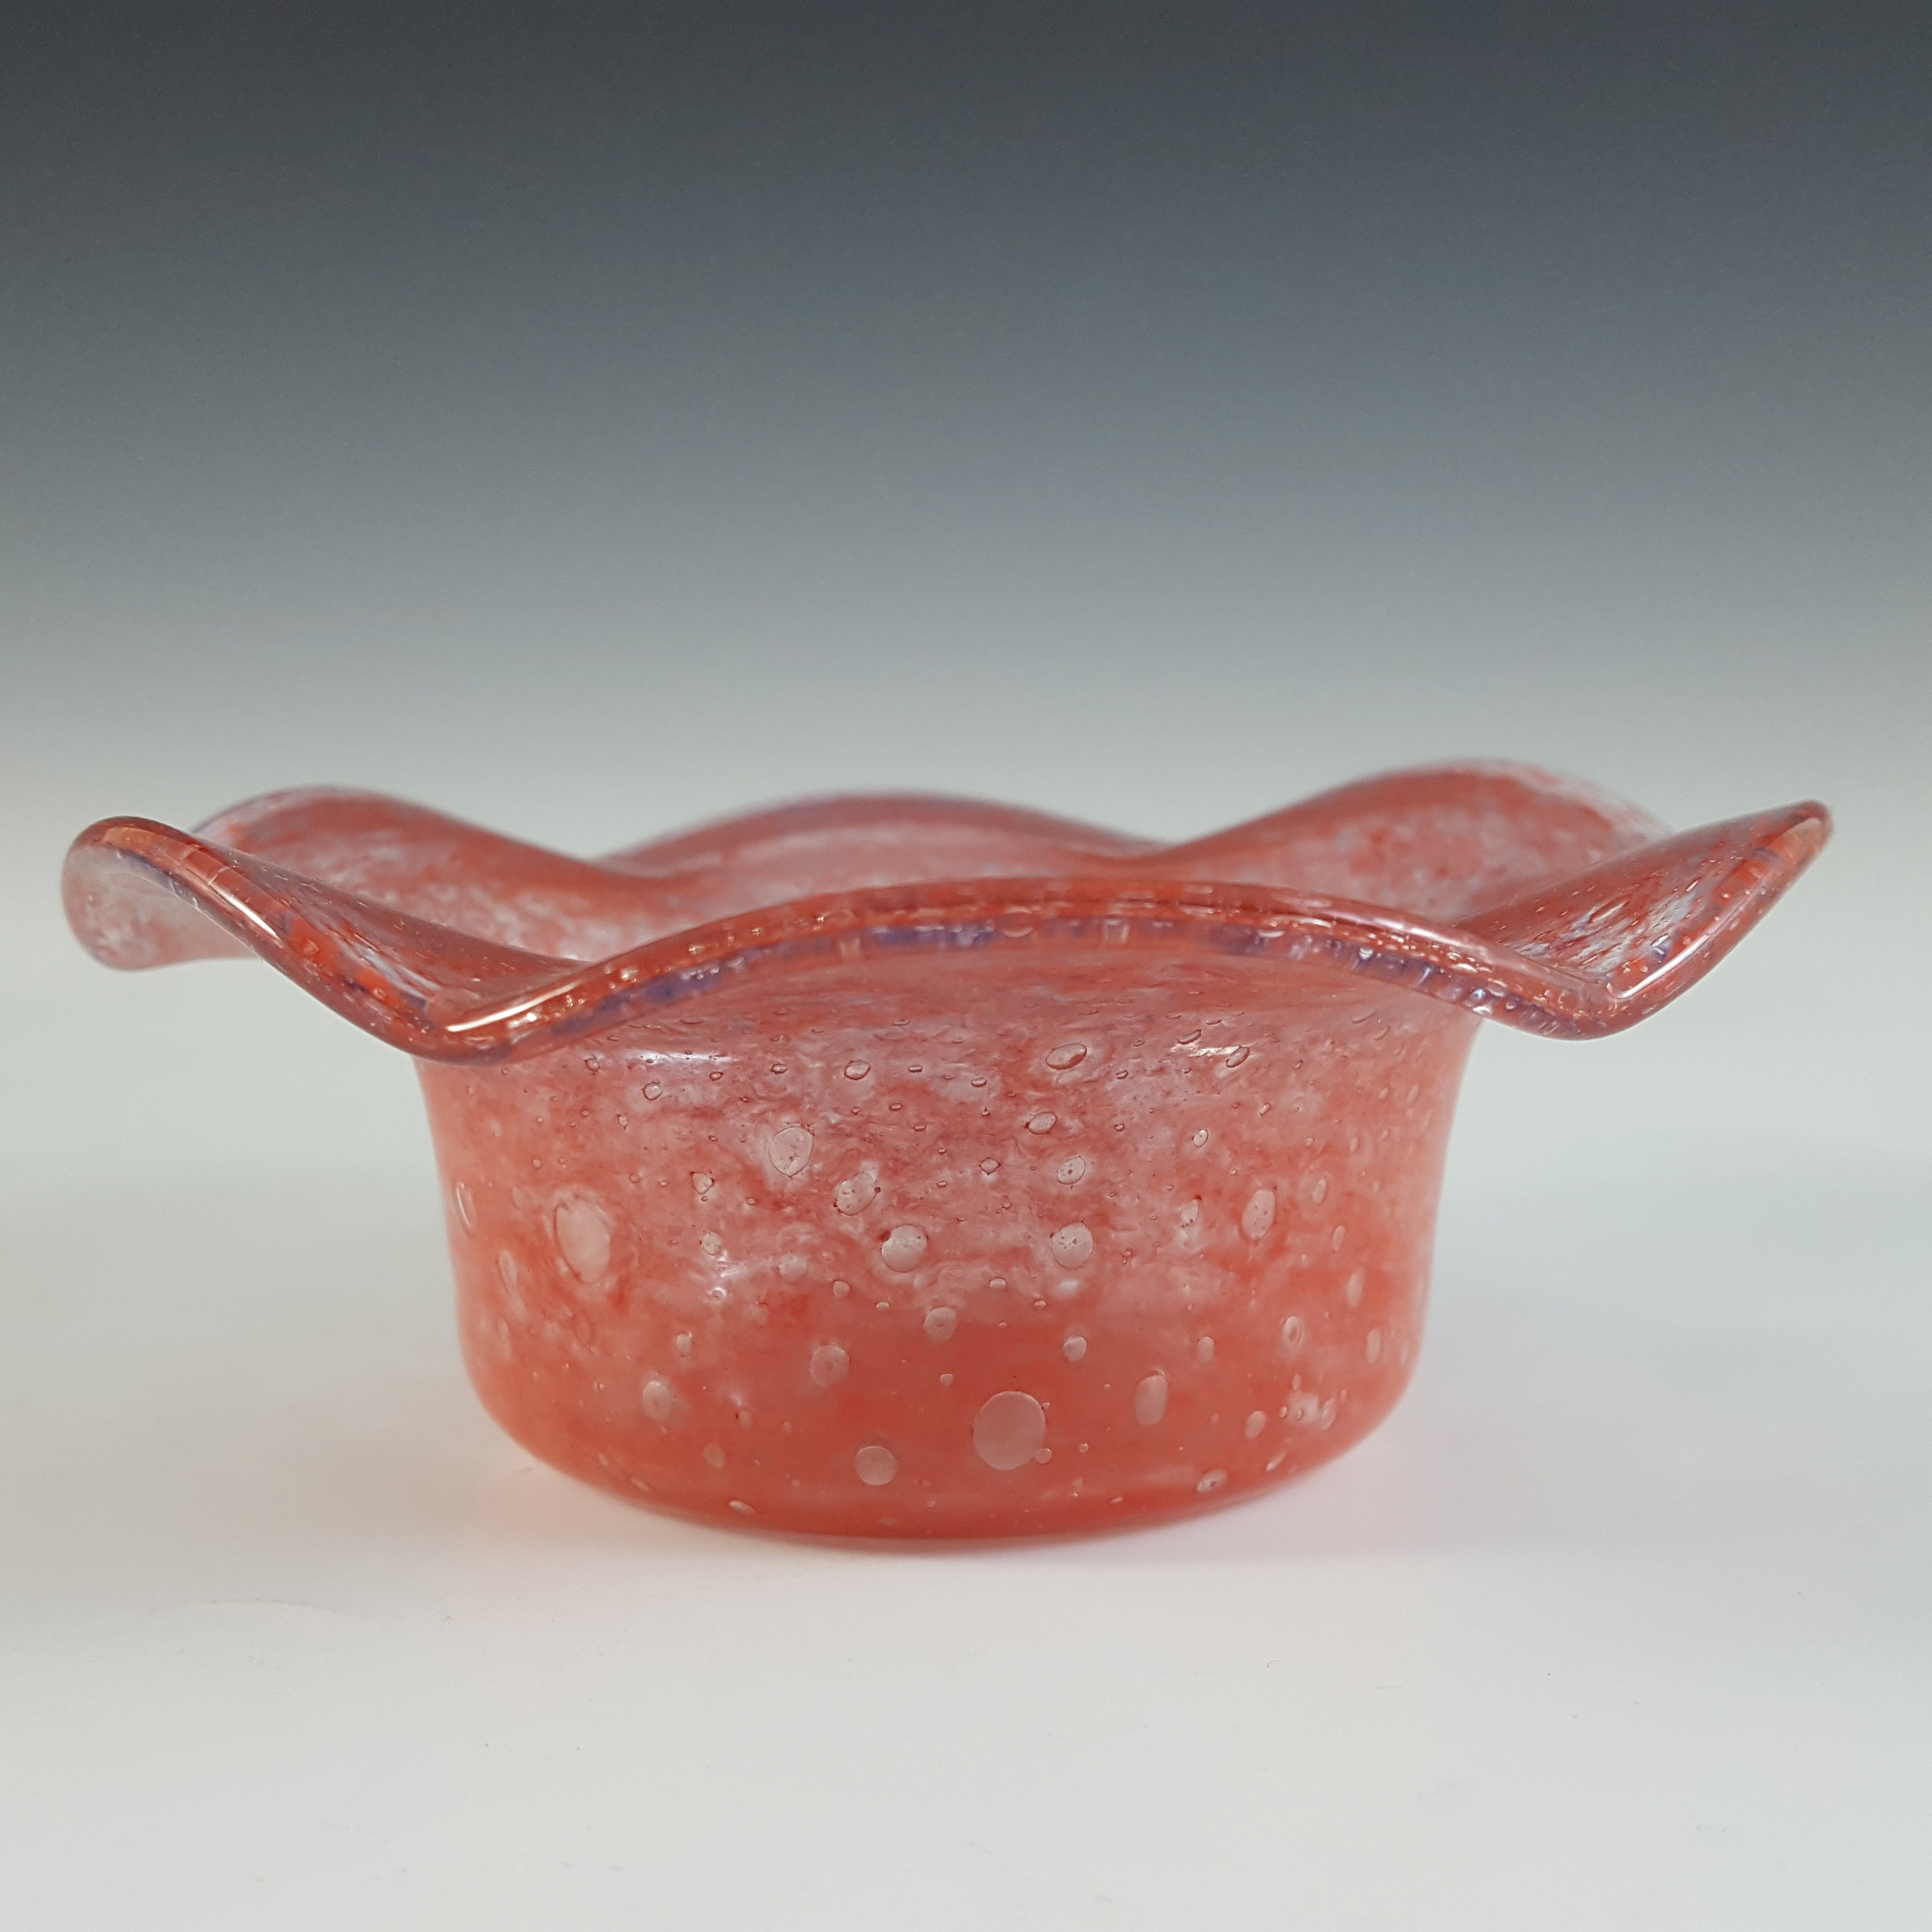 SIGNED Vasart Pink Bubbly Mottled Glass Bowl B021 - Click Image to Close